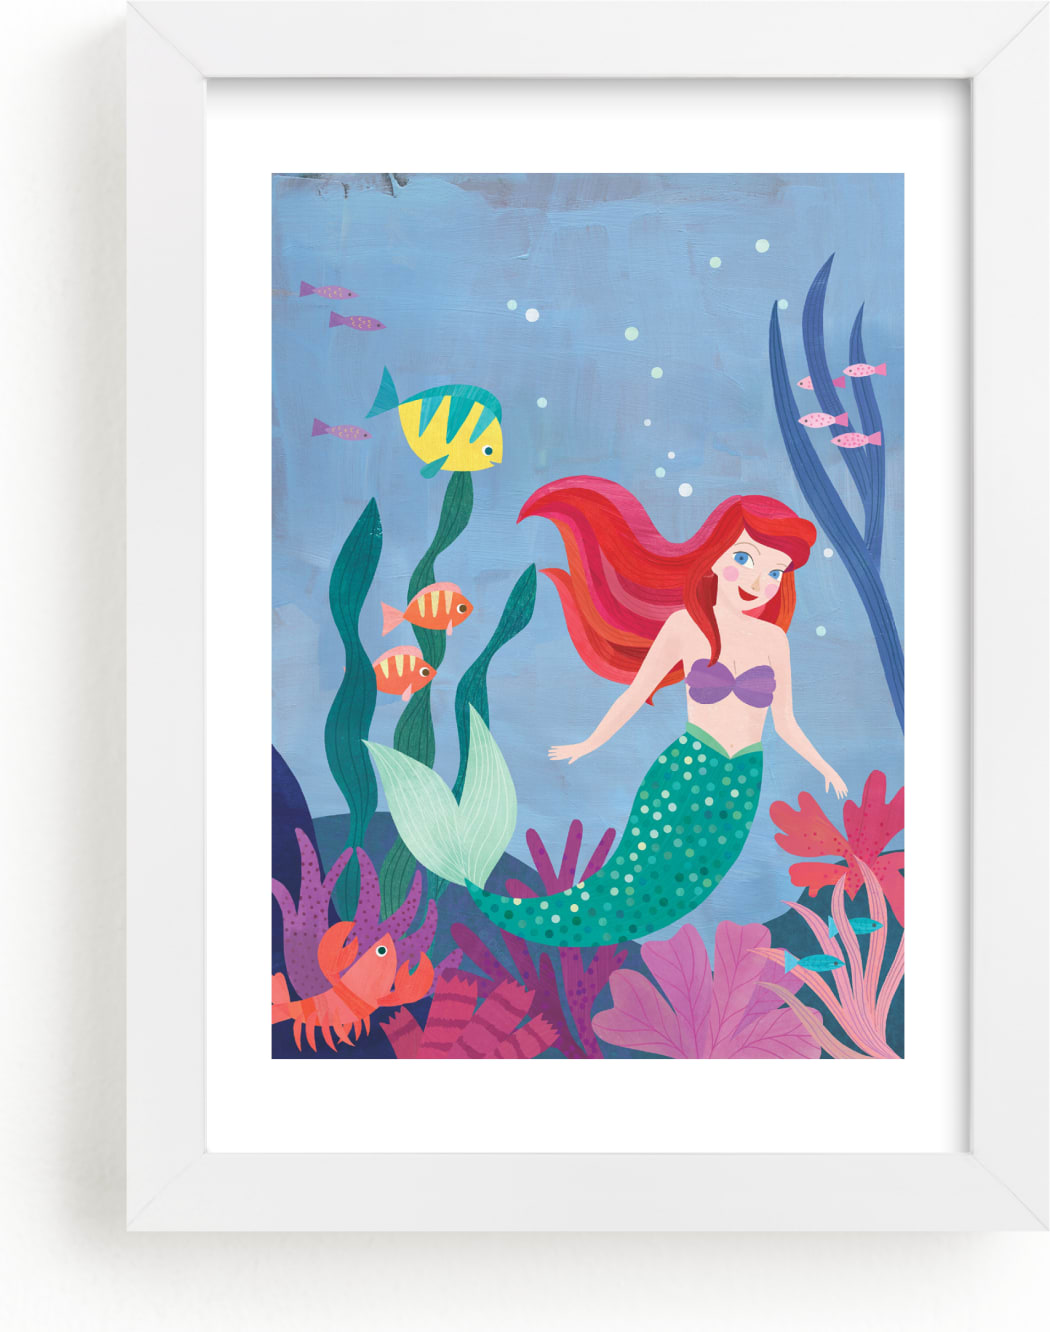 This is a blue, colorful disney art by melanie mikecz called Disney's Ariel & Friends.